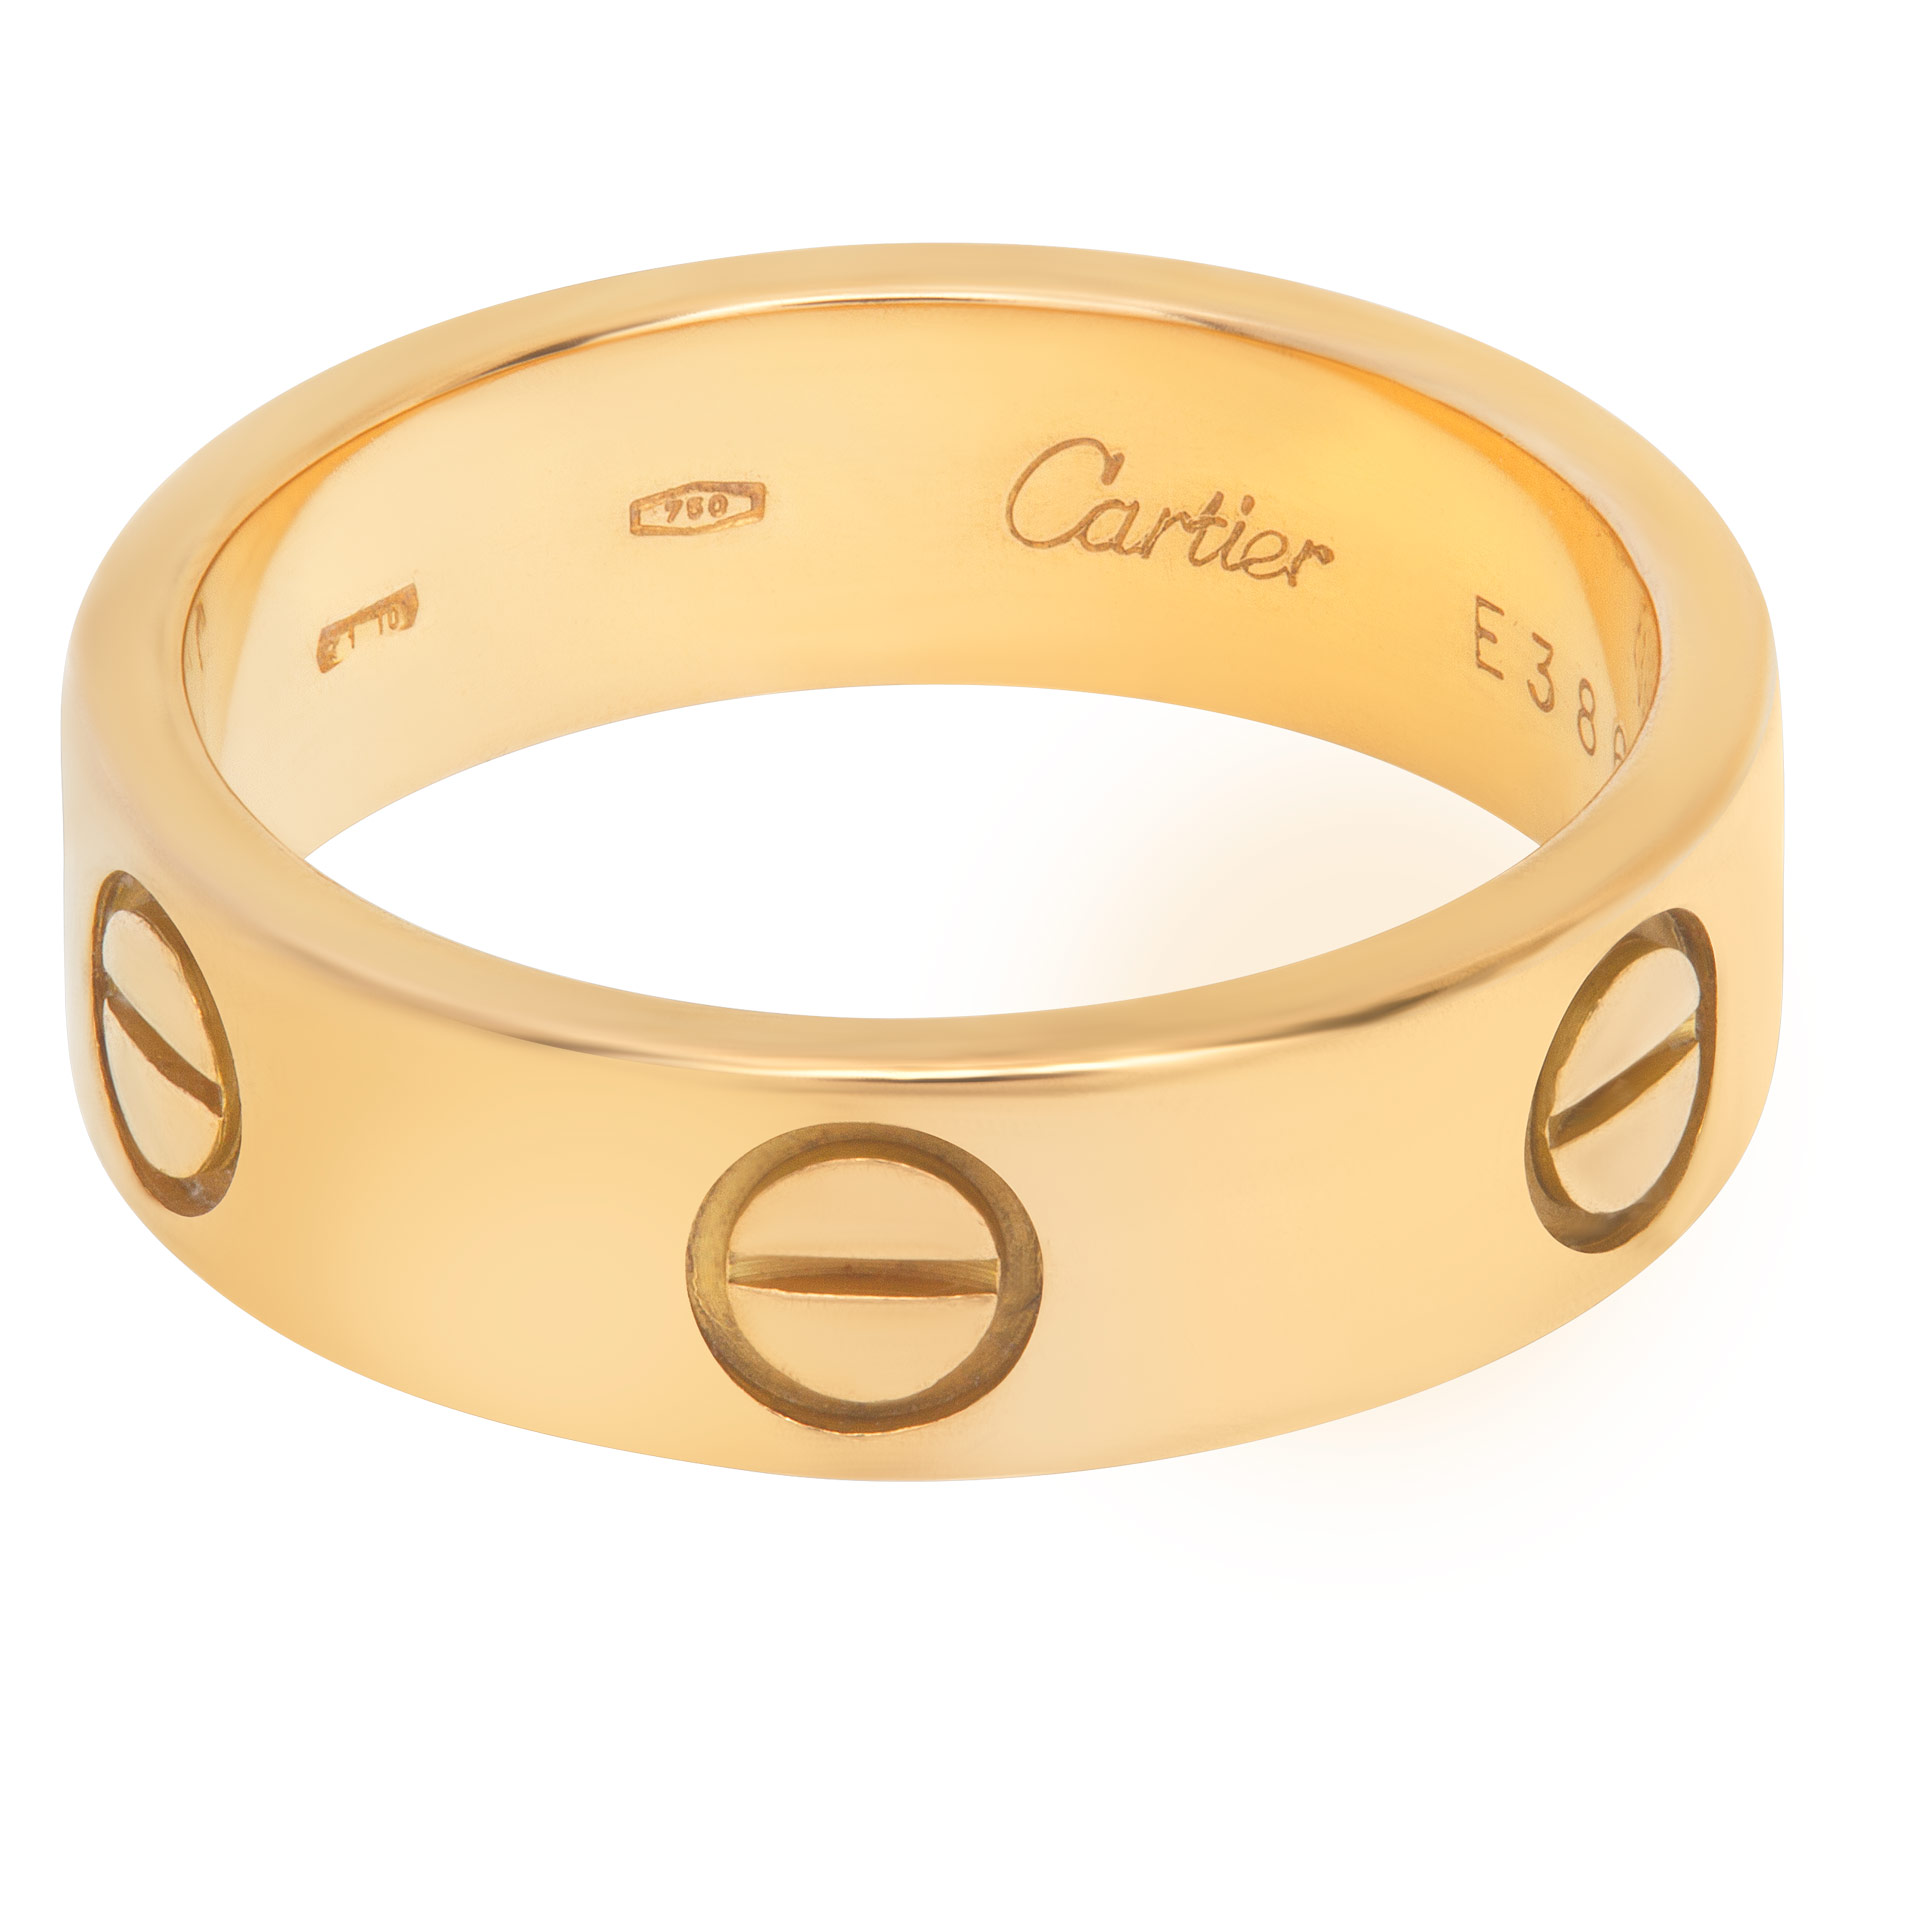 Cartier Love Ring in 18k yellow gold. Size 54